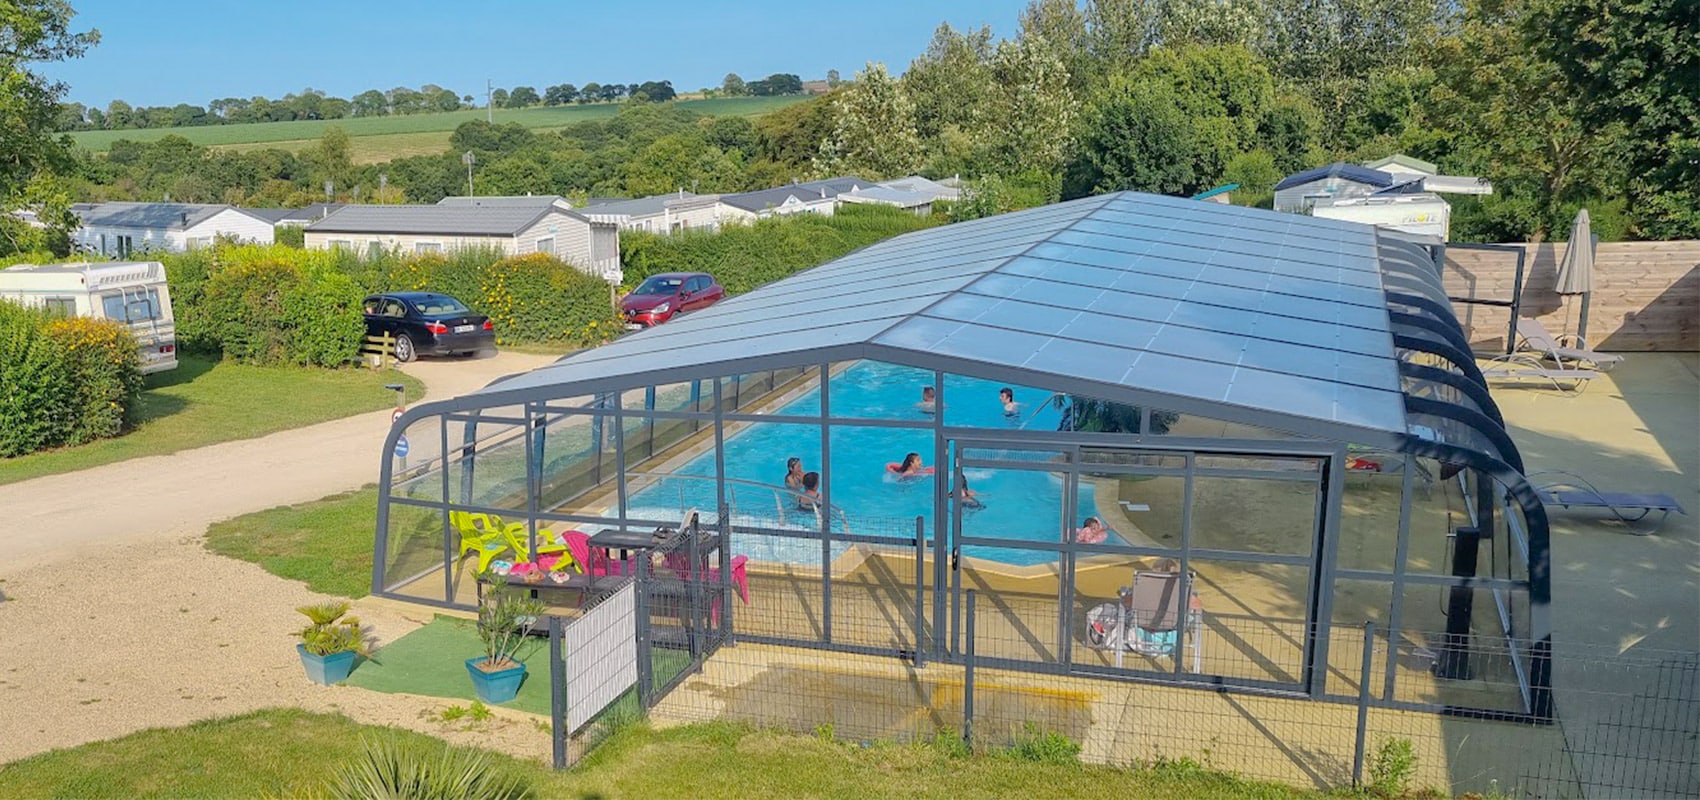 campsite with swimming pool in cote d'amor